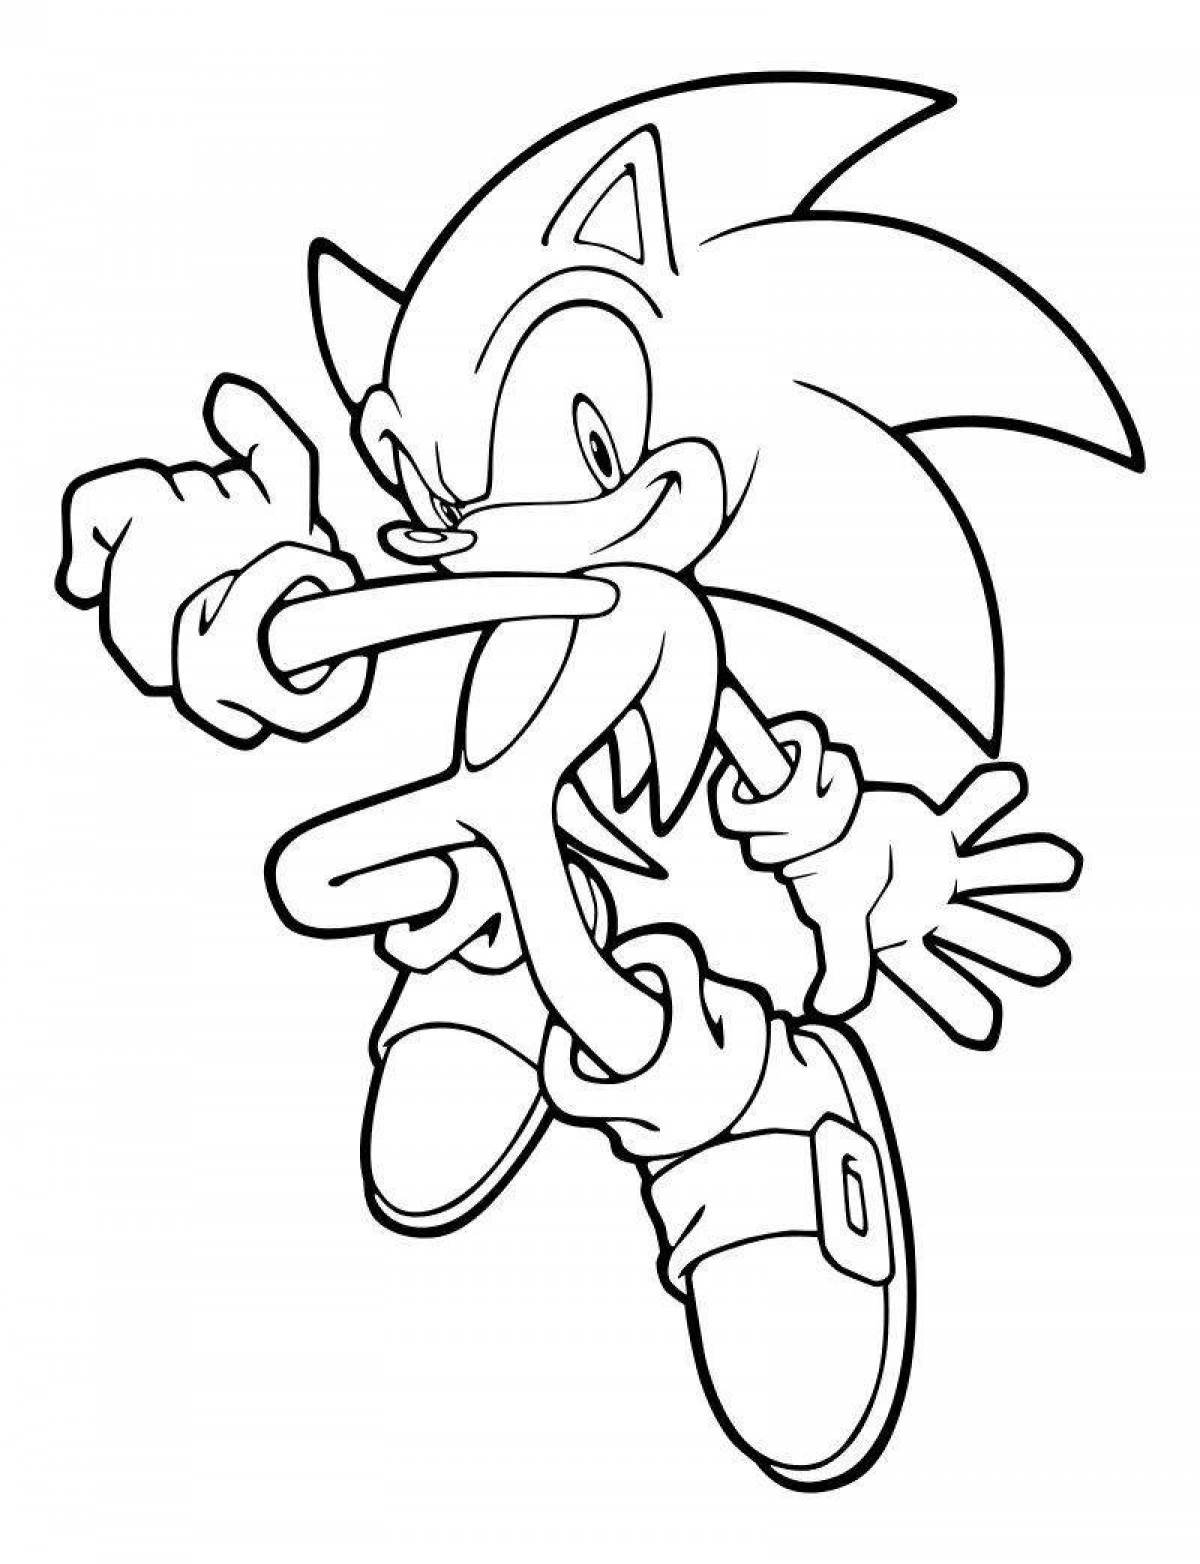 Sonic xz witty coloring book